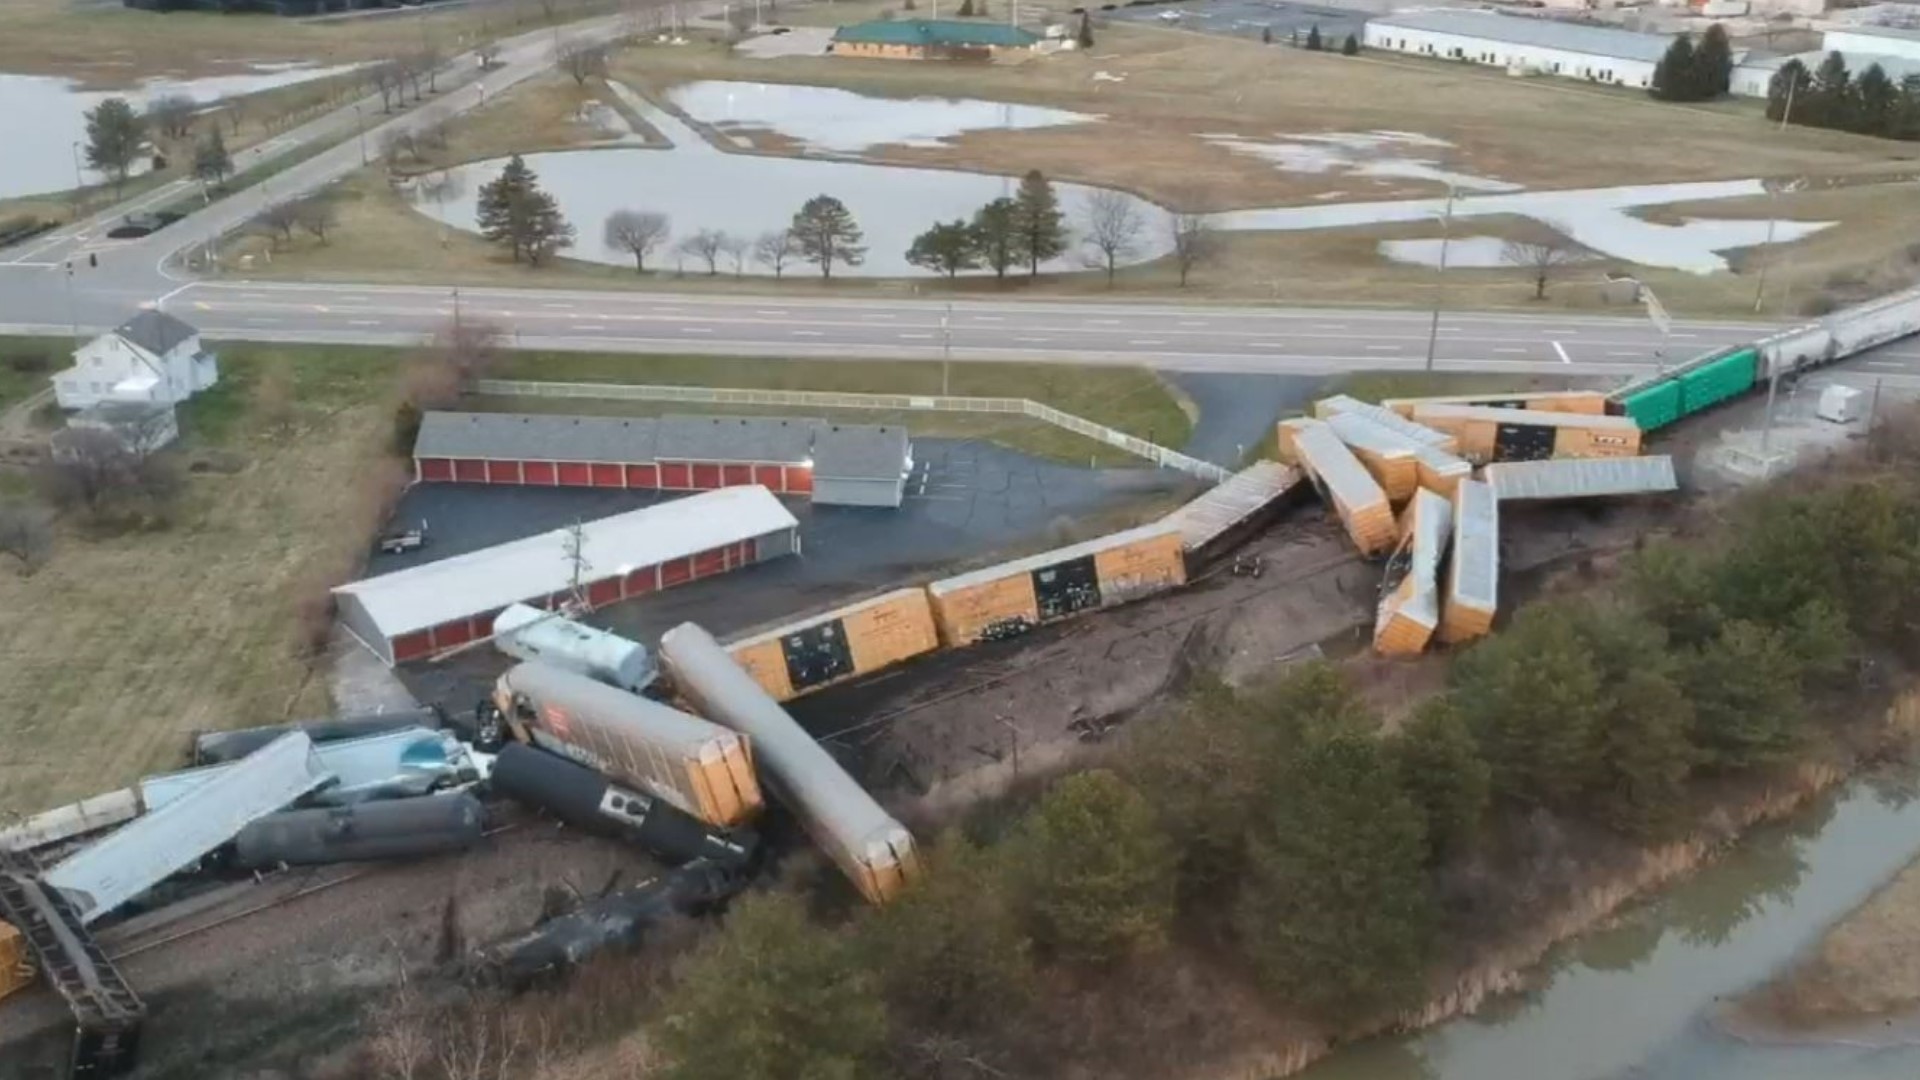 The move follows a fiery derailment on the Ohio-Pennsylvania border in February and several other accidents.